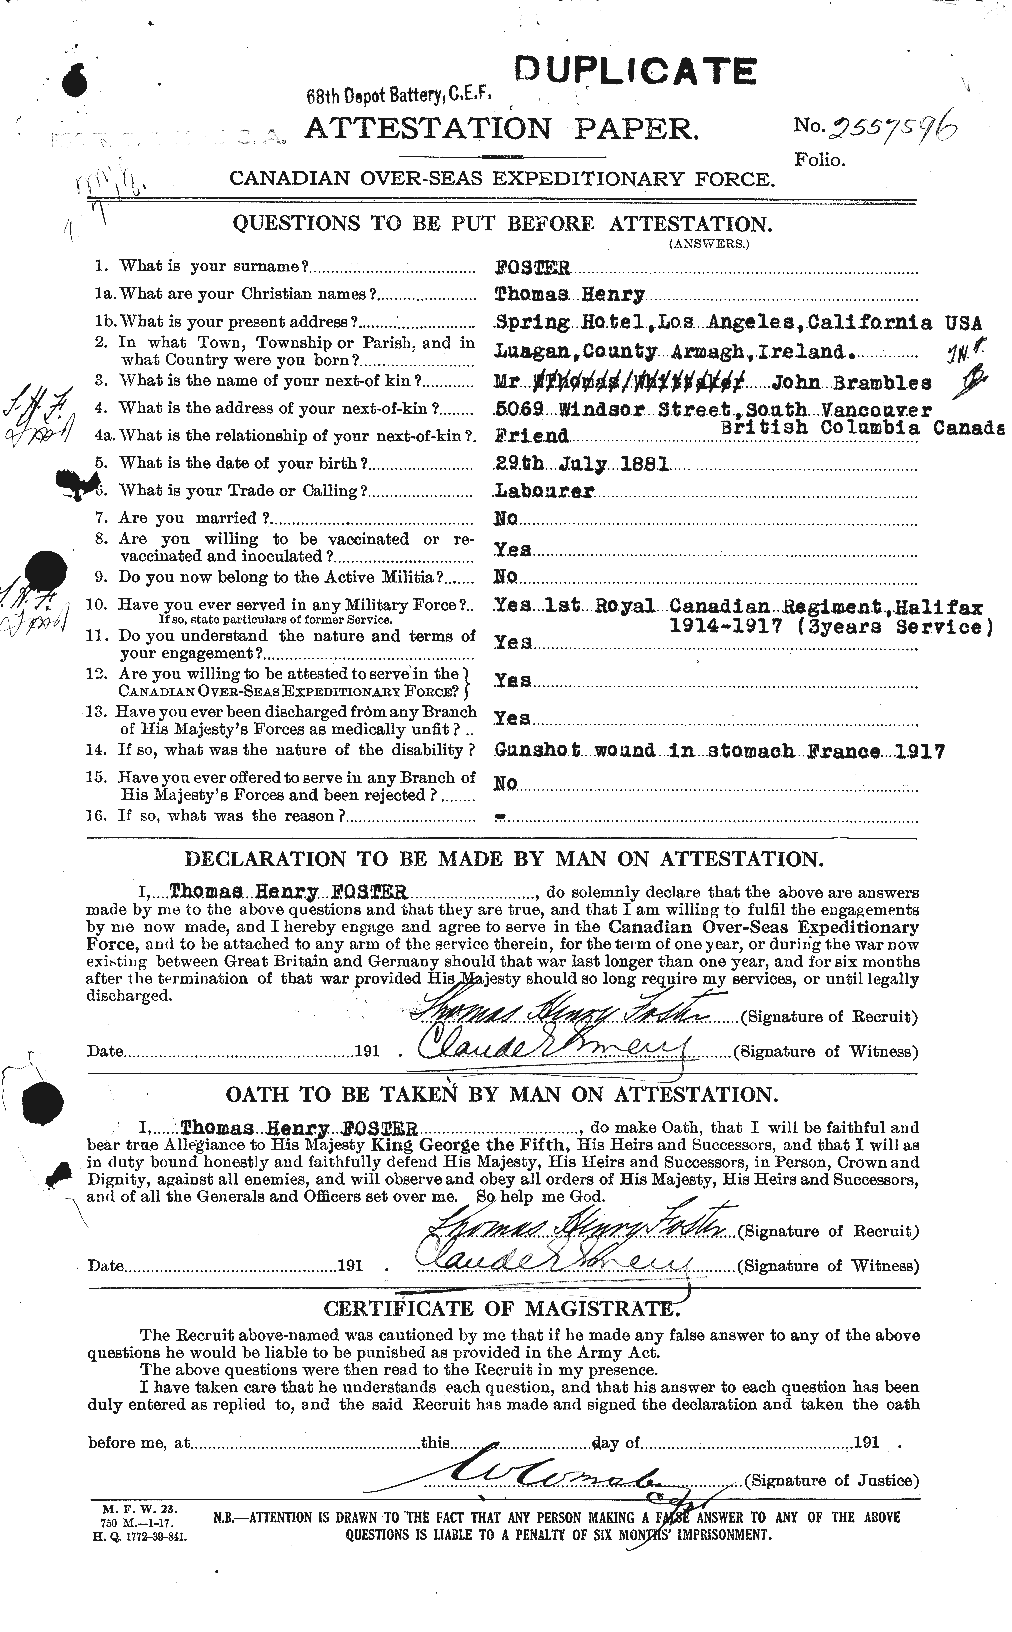 Personnel Records of the First World War - CEF 335236a